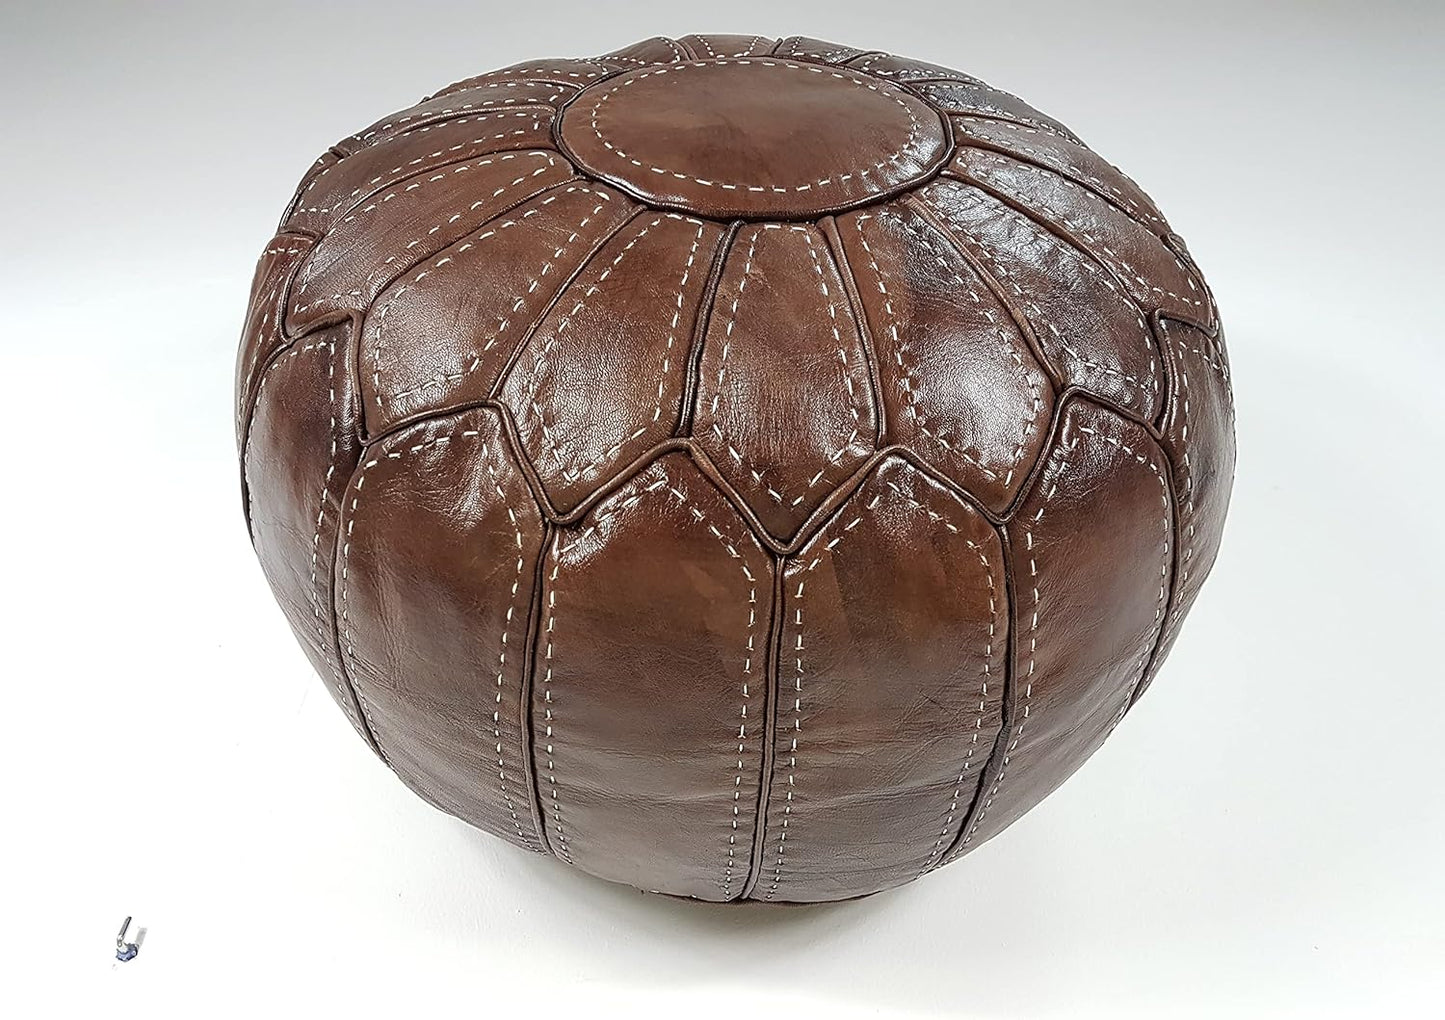 Moroccan Leather Pouf, Pouf Ottoman, Handmade Floor Poof, Pouf Footstool, Ottoman Table, Pouf and stools, unstuffed